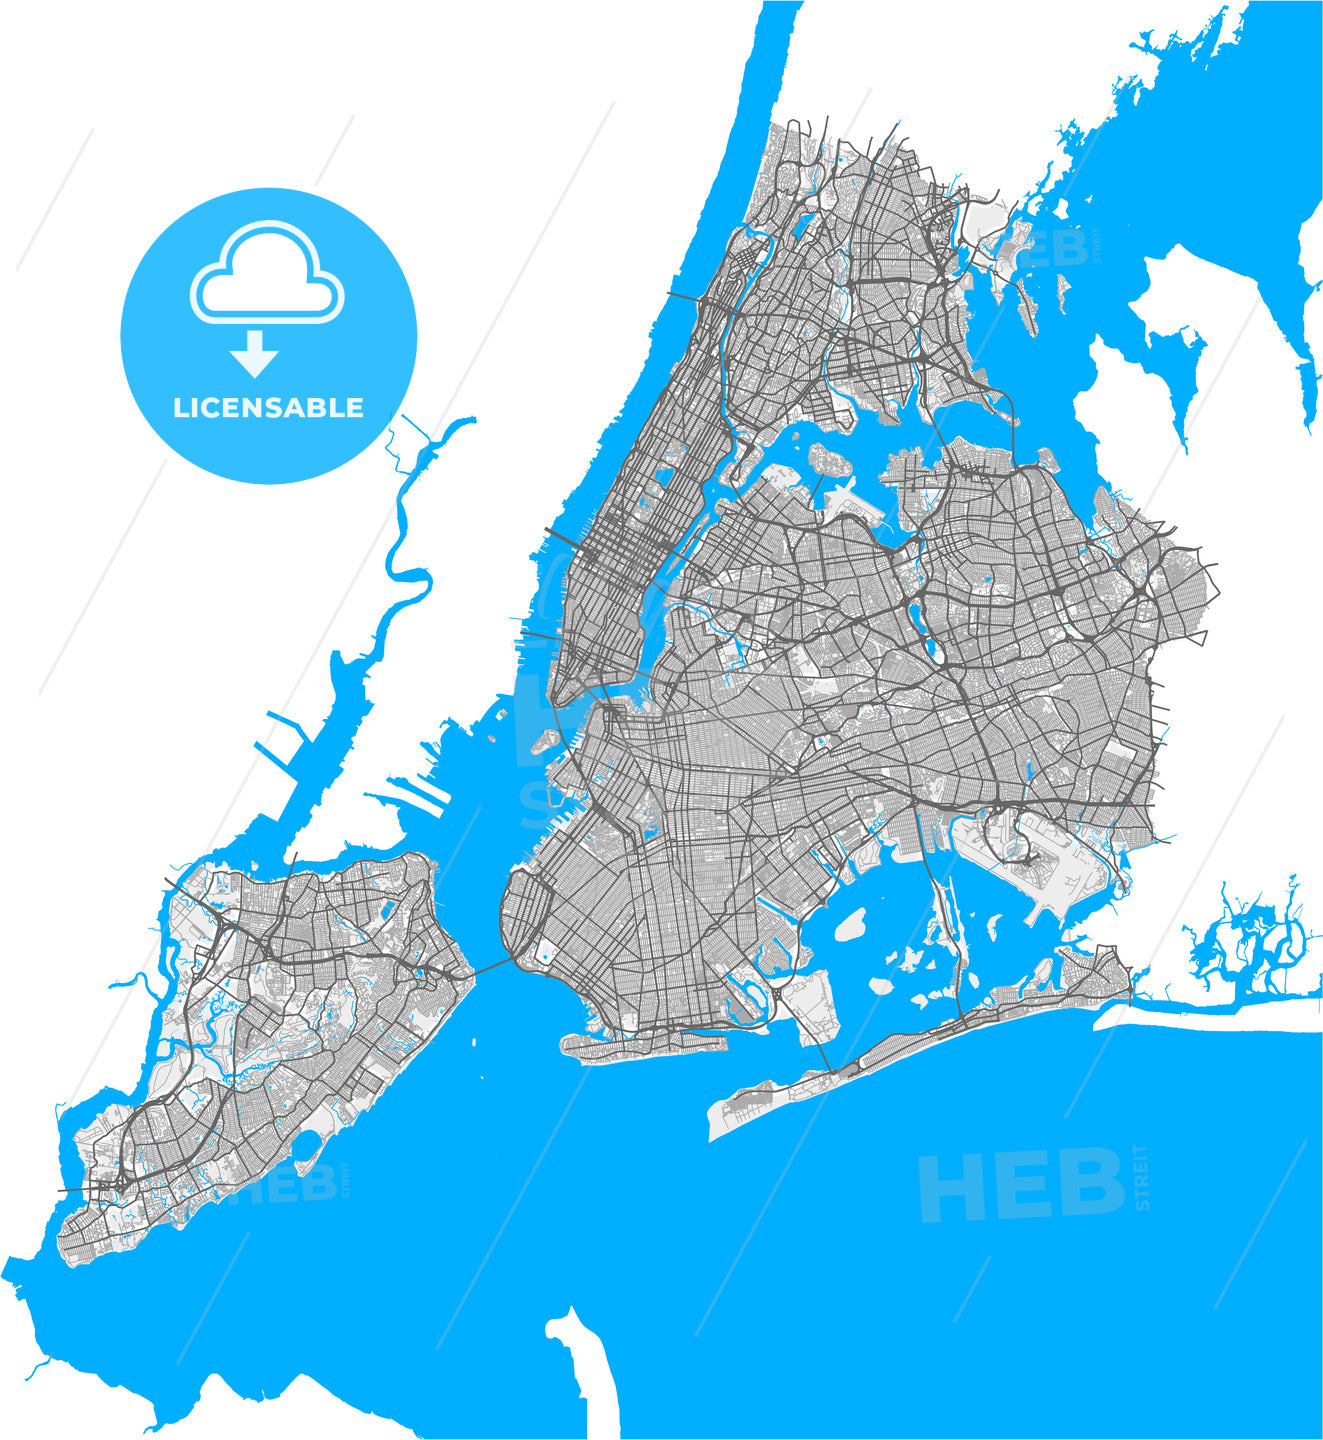 New York City, New York, United States, high quality vector map